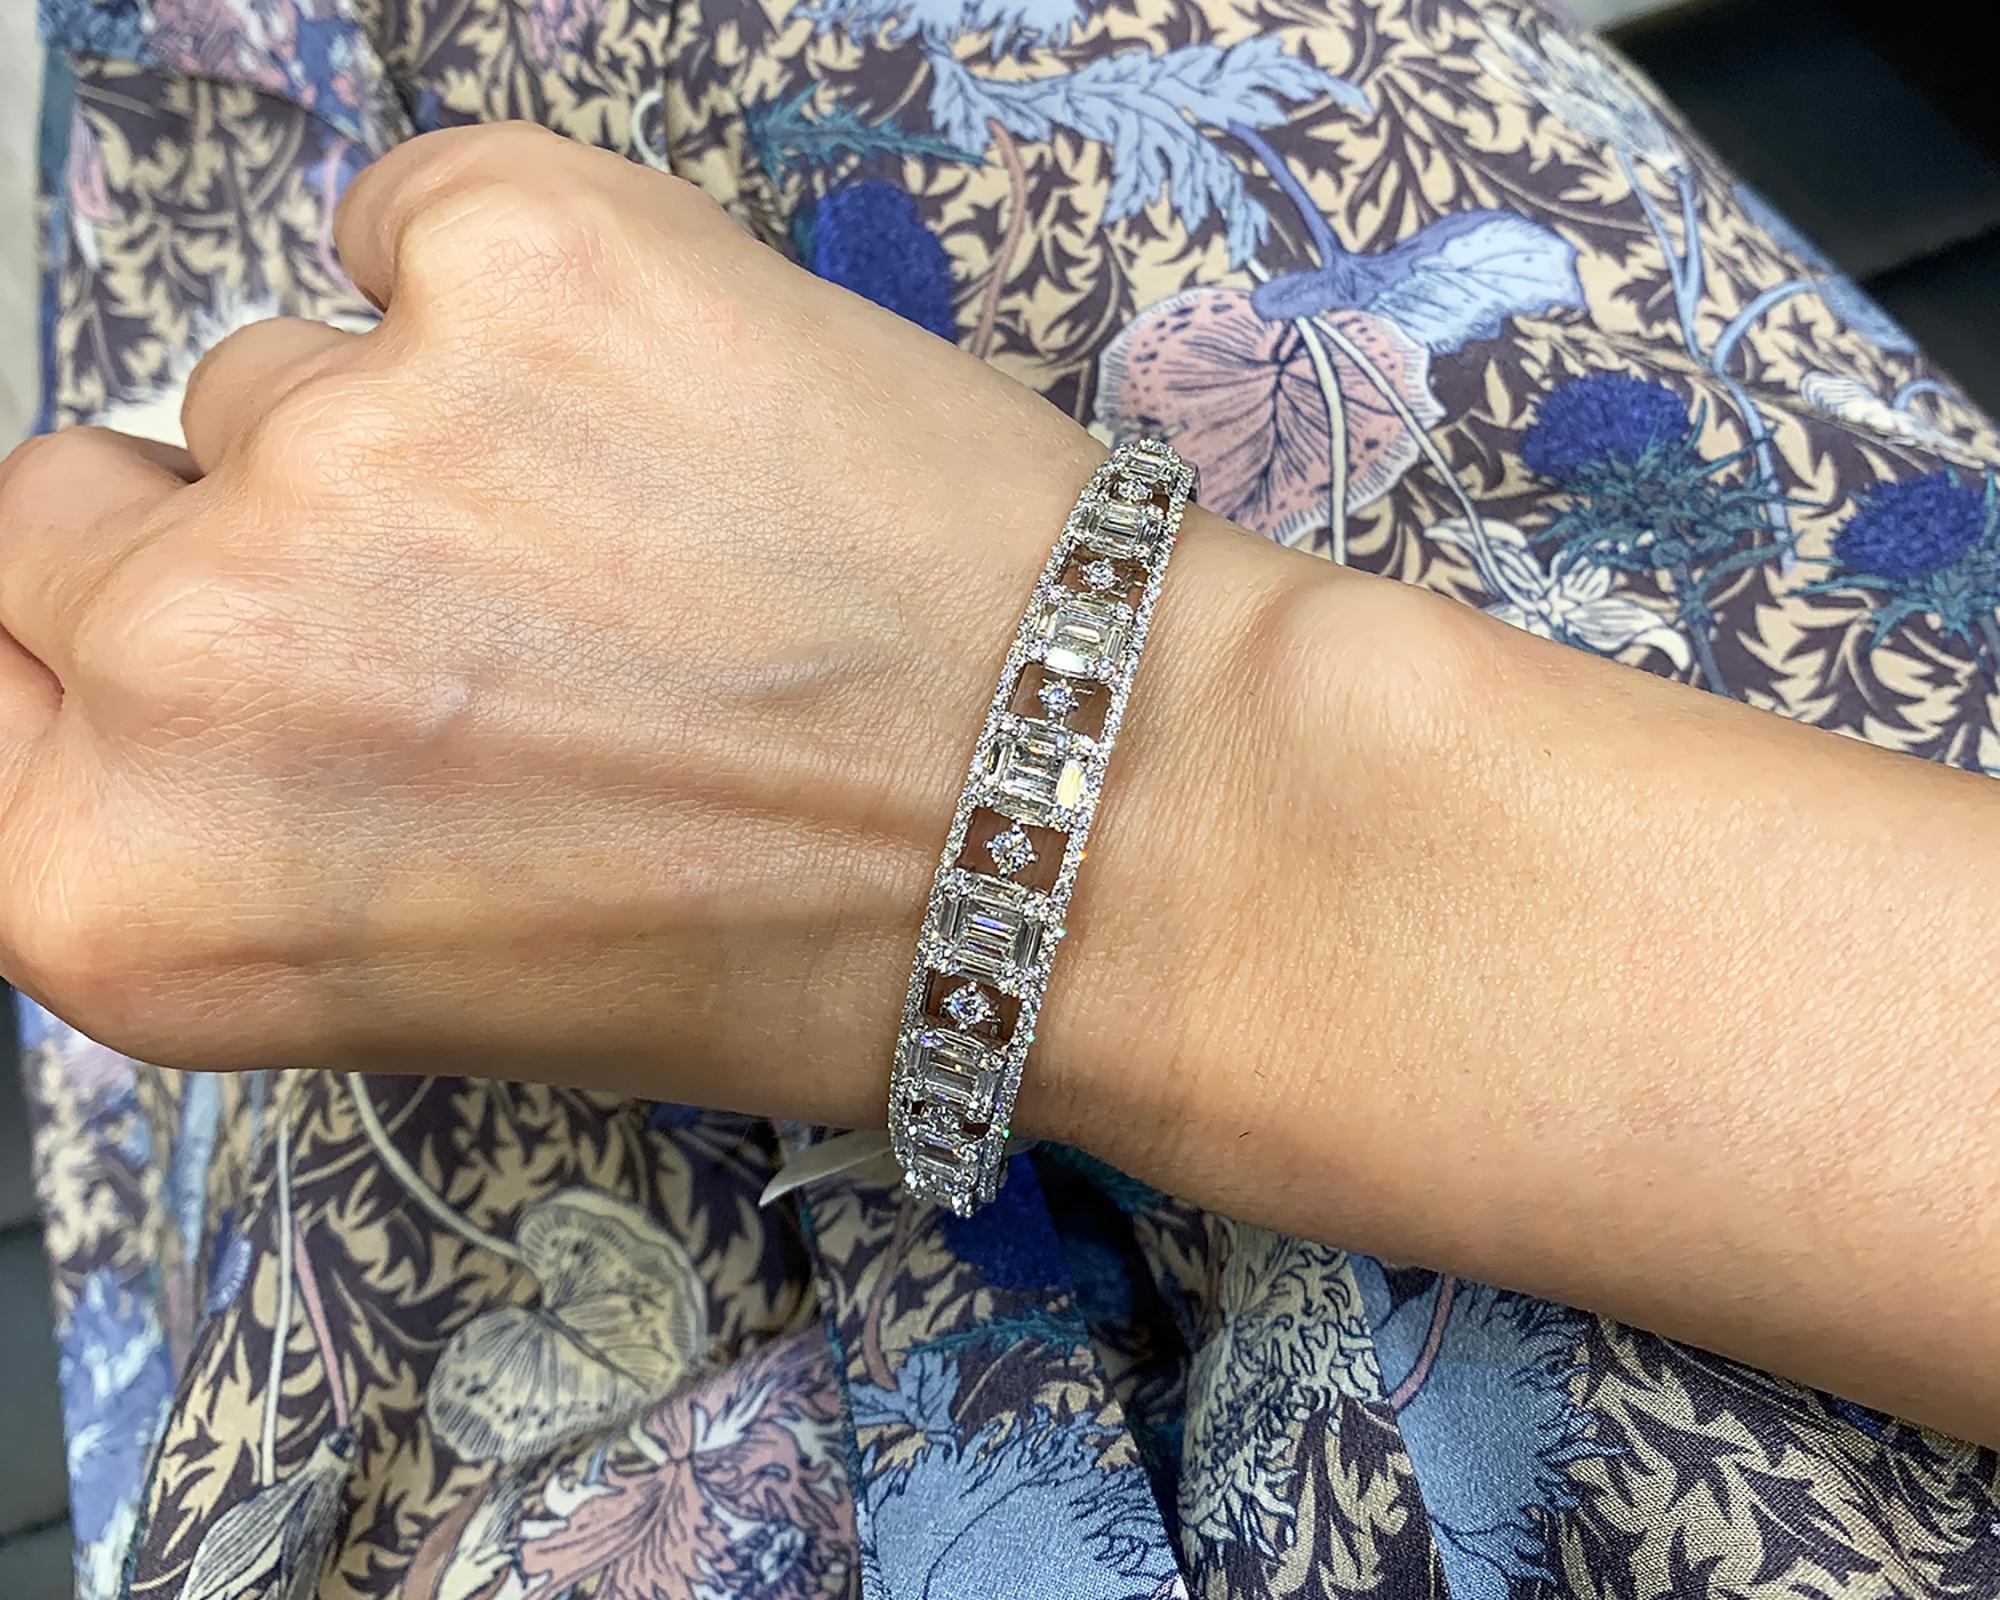 Such an elegant diamond bangle would not be out of place at an event during the late 19th century where the dress code was white tie—arguably the most formal in traditional evening Western dress codes. The thought of how many rules of etiquette one